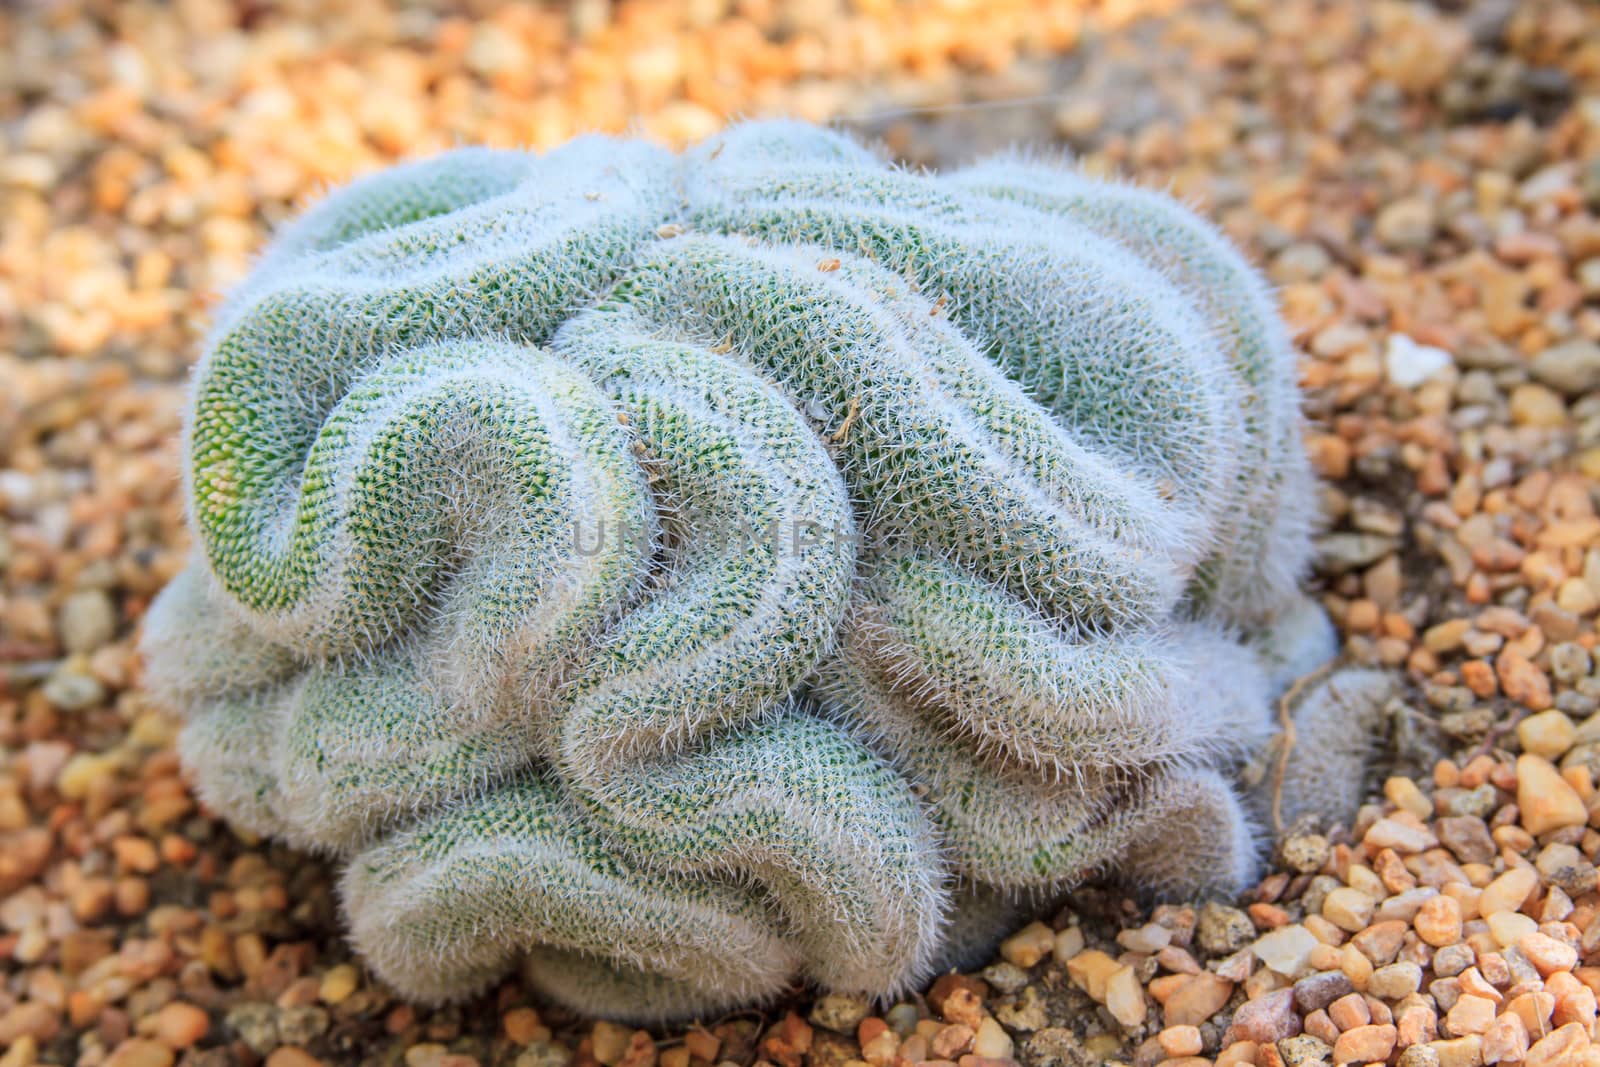 Cactus species coiled like a snake or brain by worrayuth